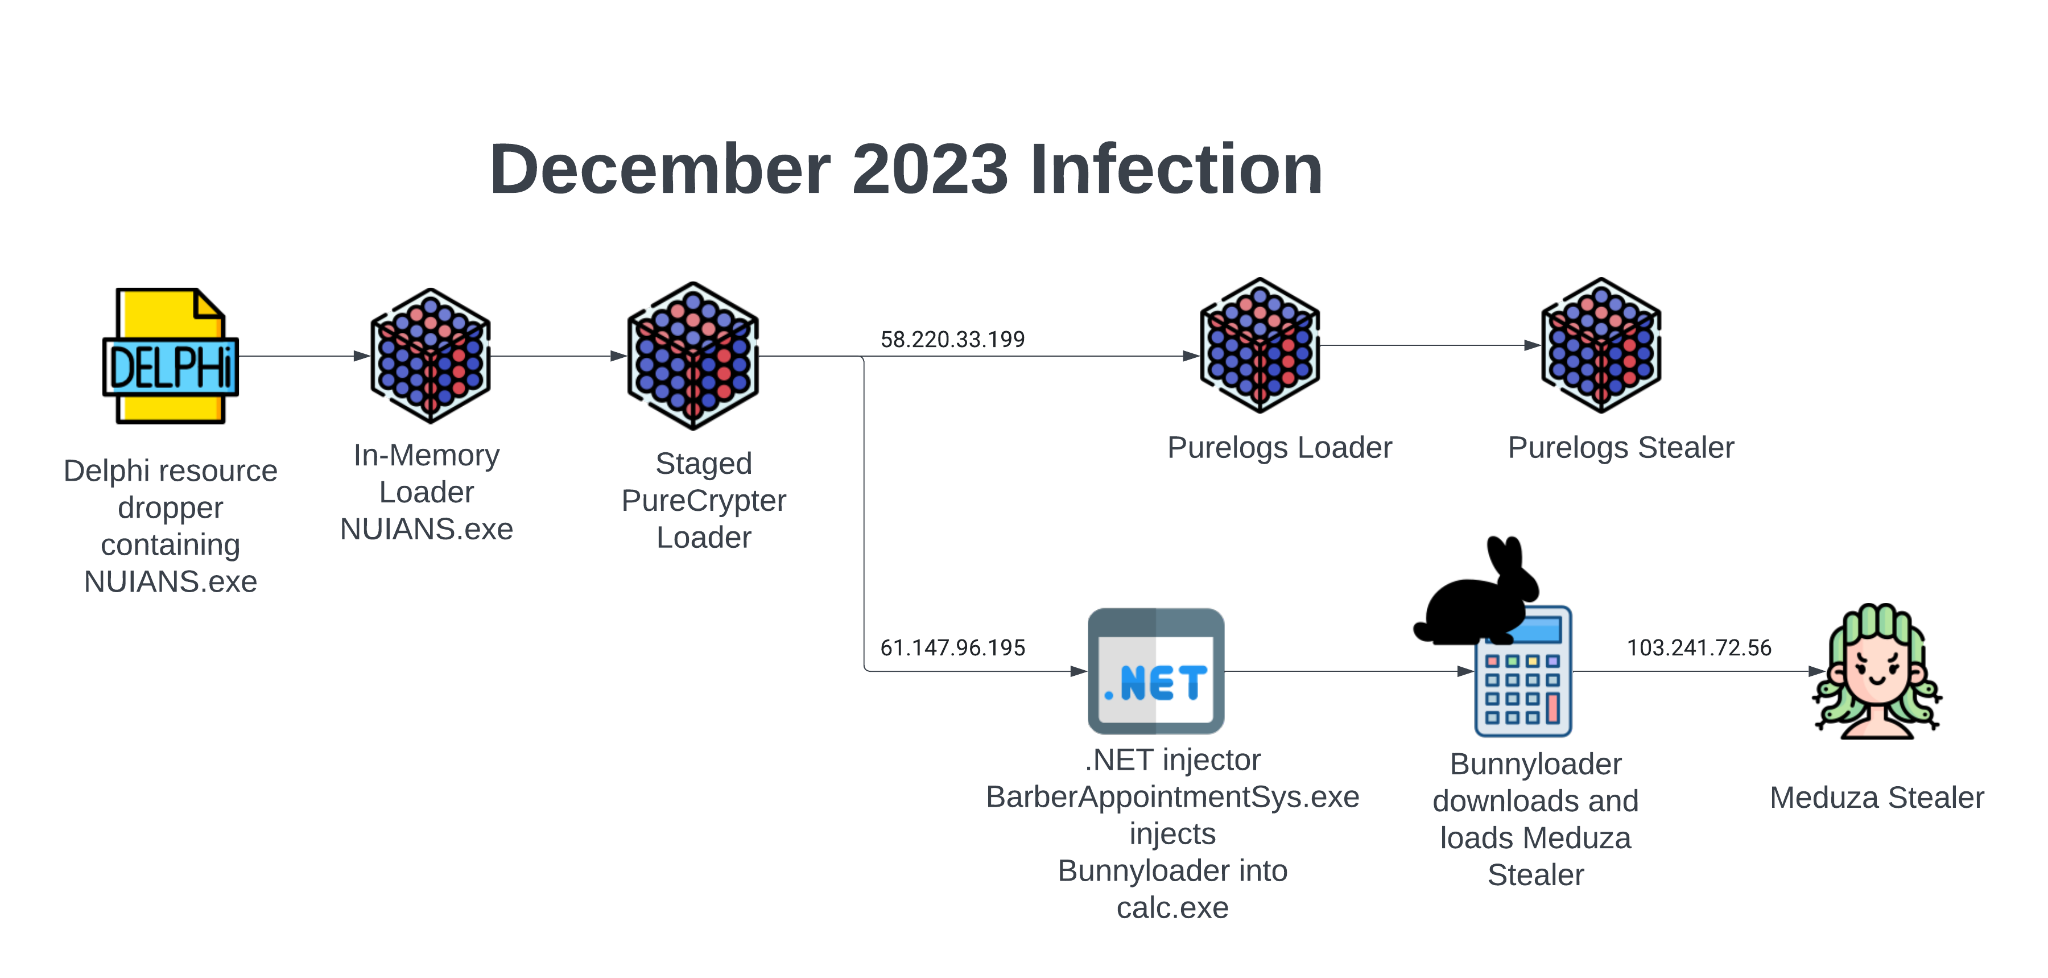 Image 4 is a diagram of the December 2023 BunnyLoader infection. Delphi resource dropper containing NUIANS.exe. In-memory loader NUIANS.exe. Staged PureCrypter loader. Branch one: IP address. Purelogs loader. Purelogs stealer. Branch two: IP address. .NET injector. EXE injects BunnyLoader into EXE. BunnyLoader downloads and loads Meduza Stealer. Meduza Stealer. 